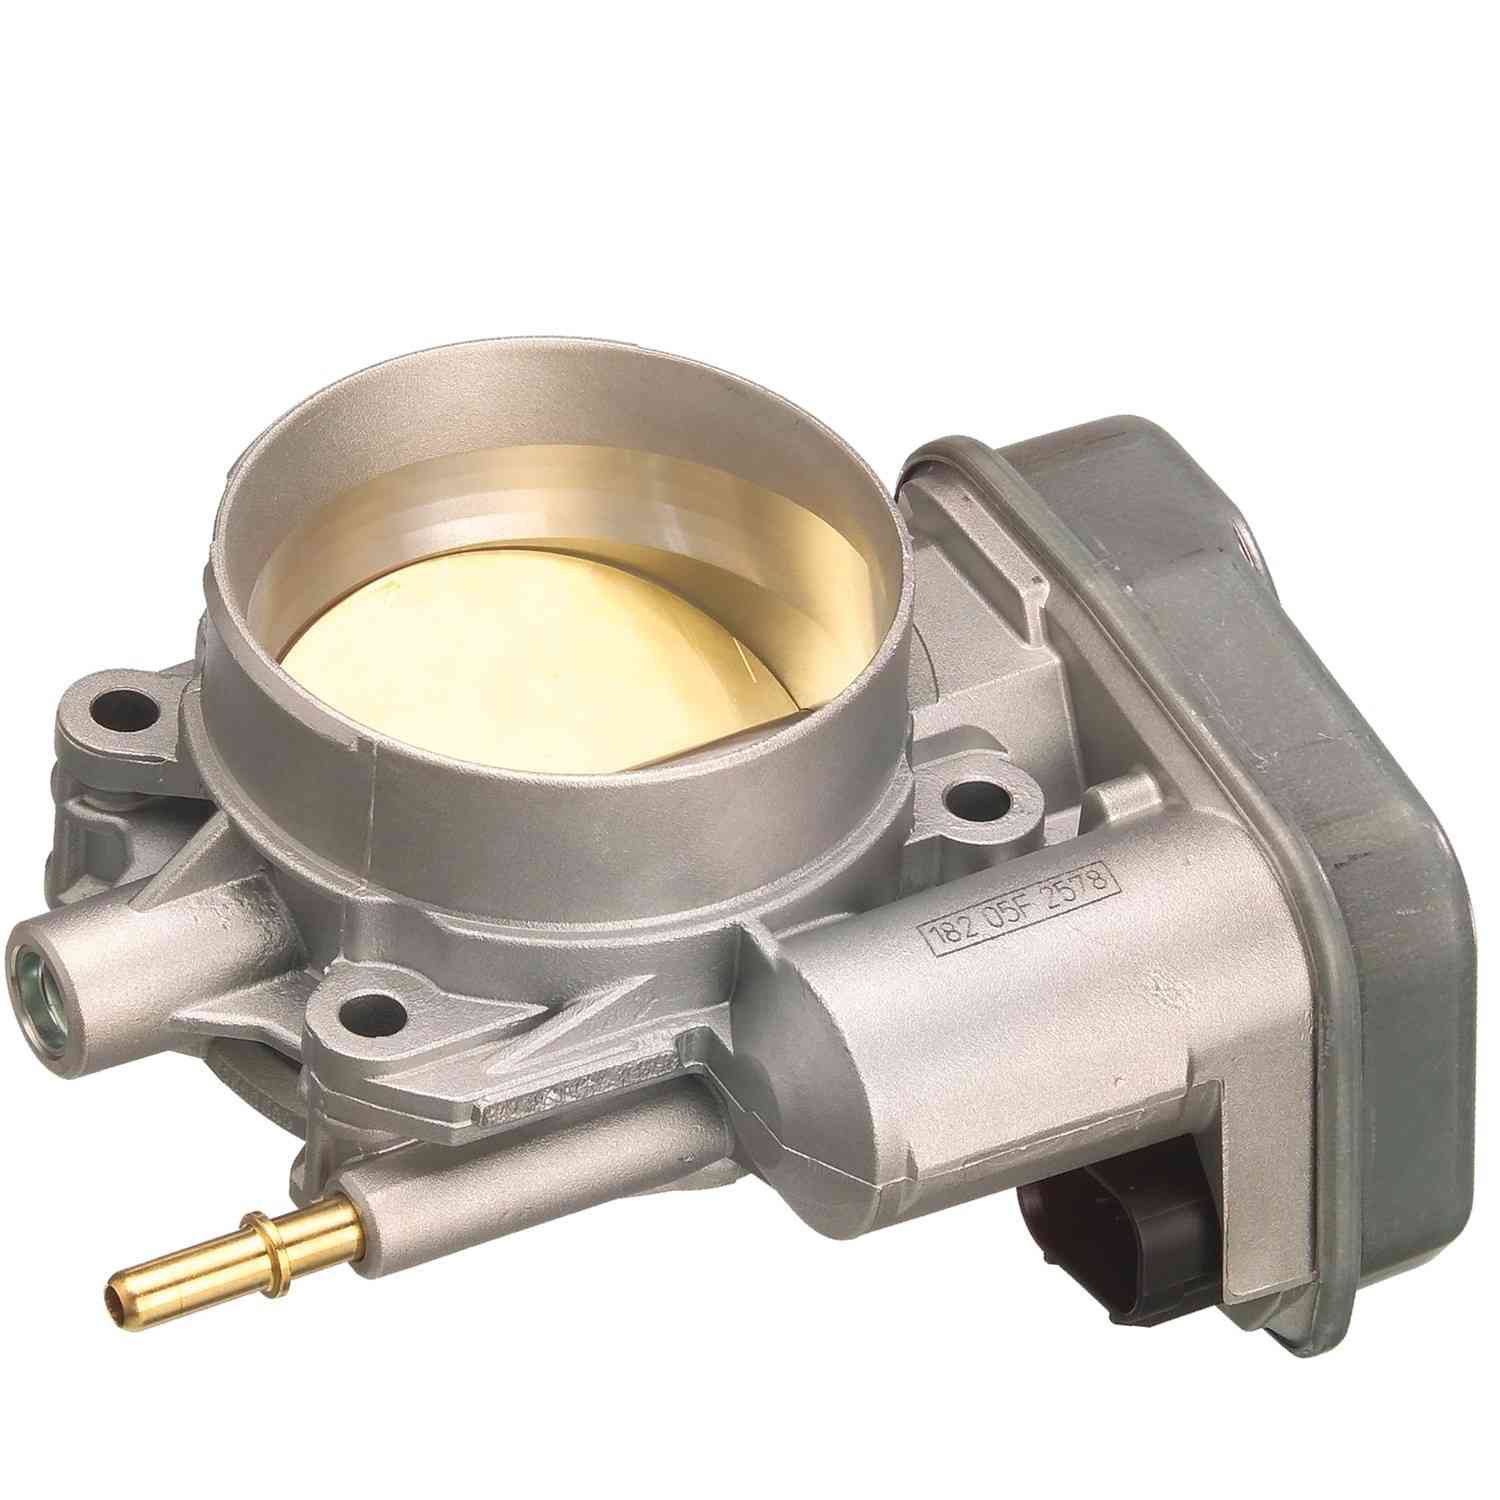 Pierburg distributed by Hella Electronic Throttle Body Module 7.14408.03.0